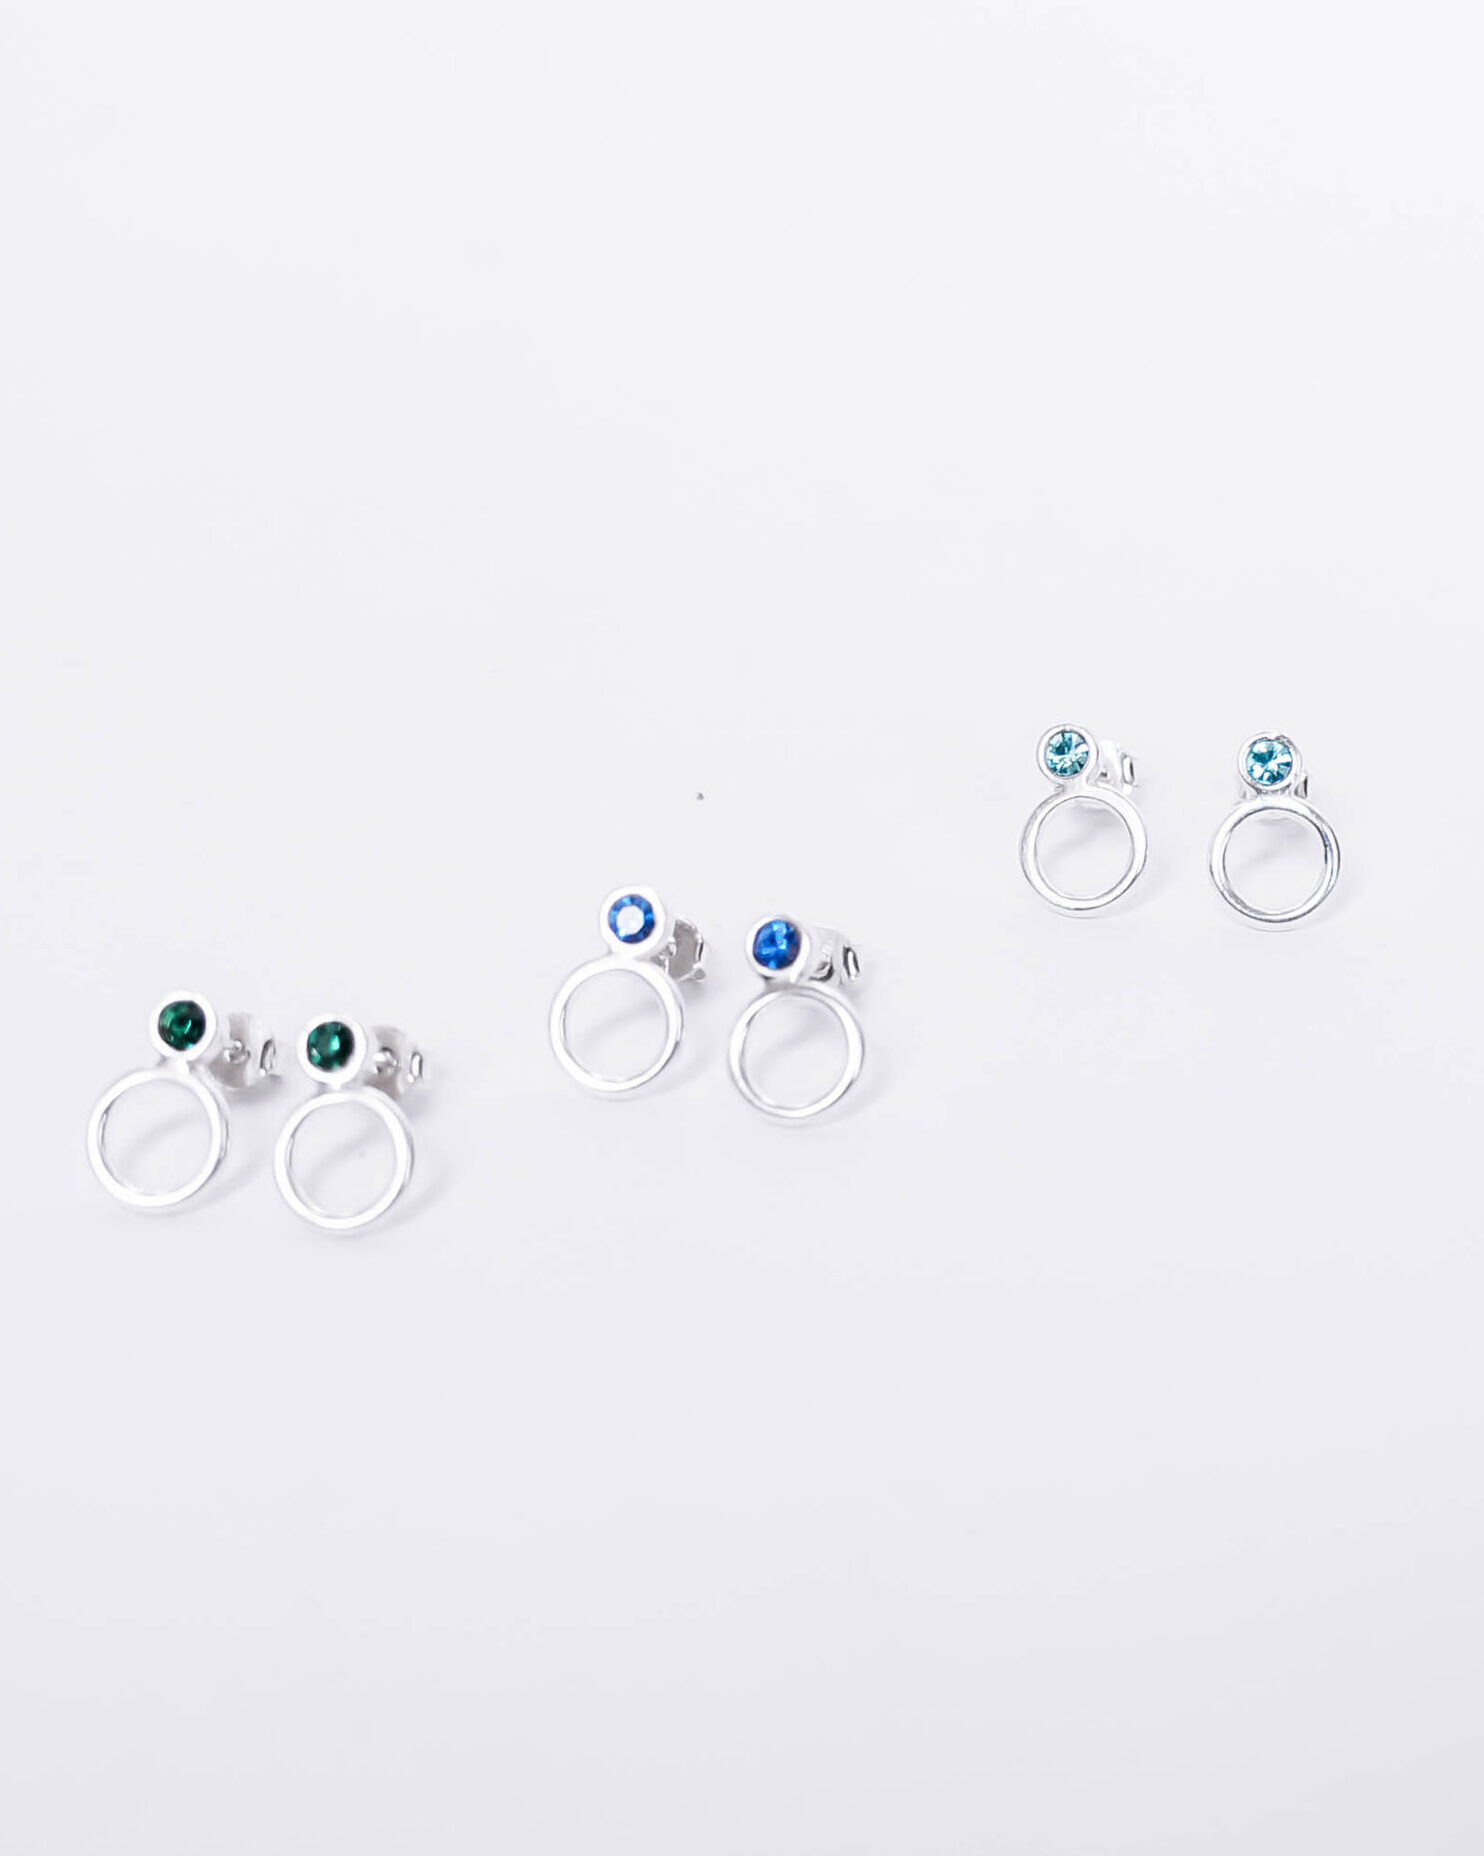 Colorful circle earrings with zircon